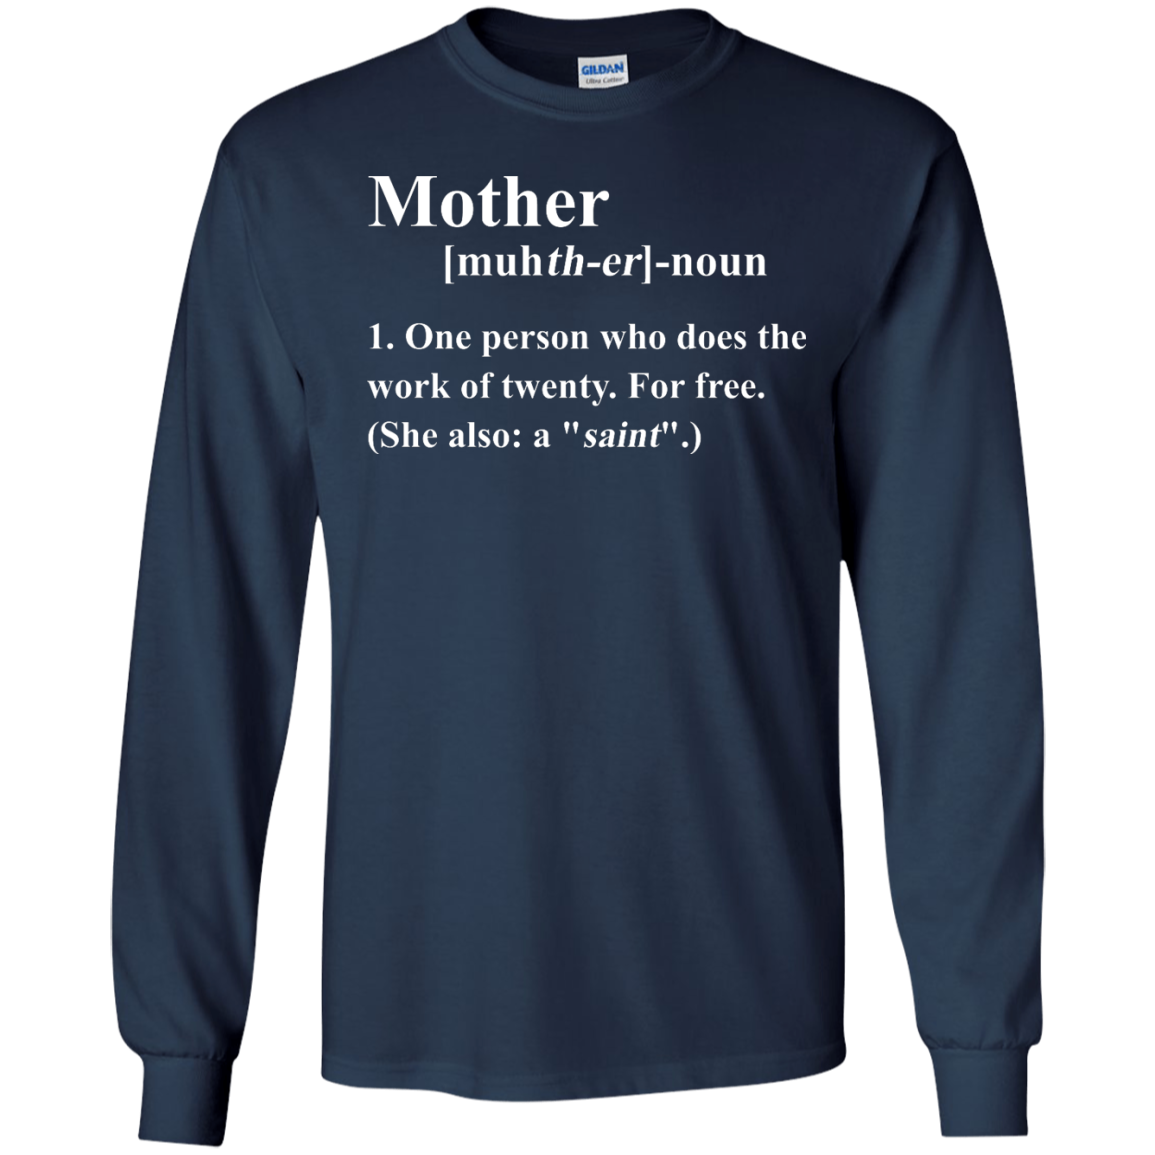 Mother Definition Shirt - One Person Who Does The Work Of Twenty